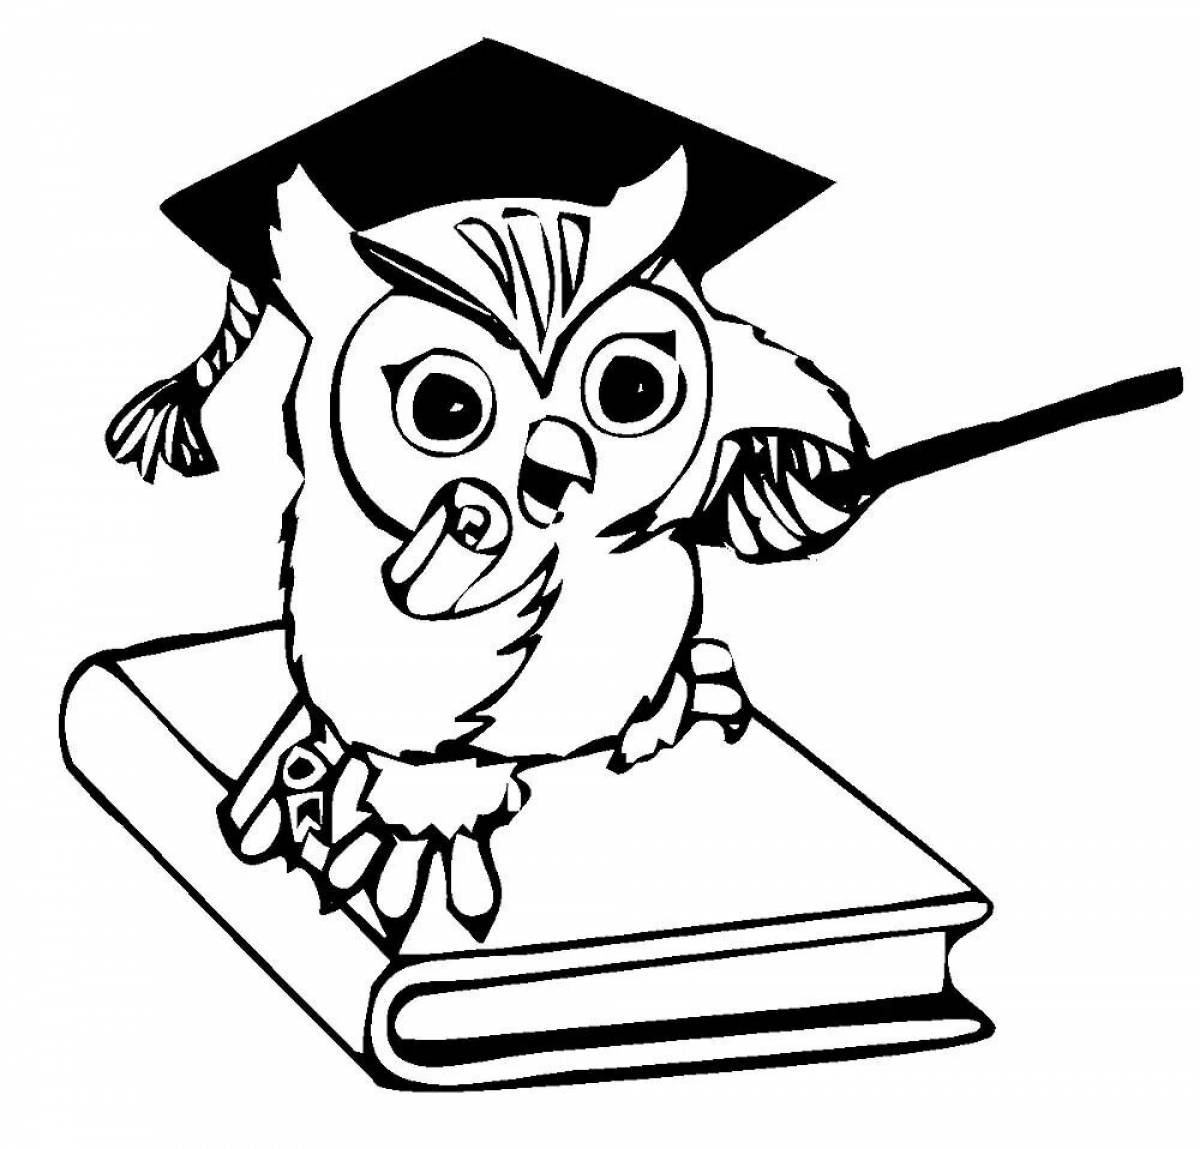 Owl with books #13